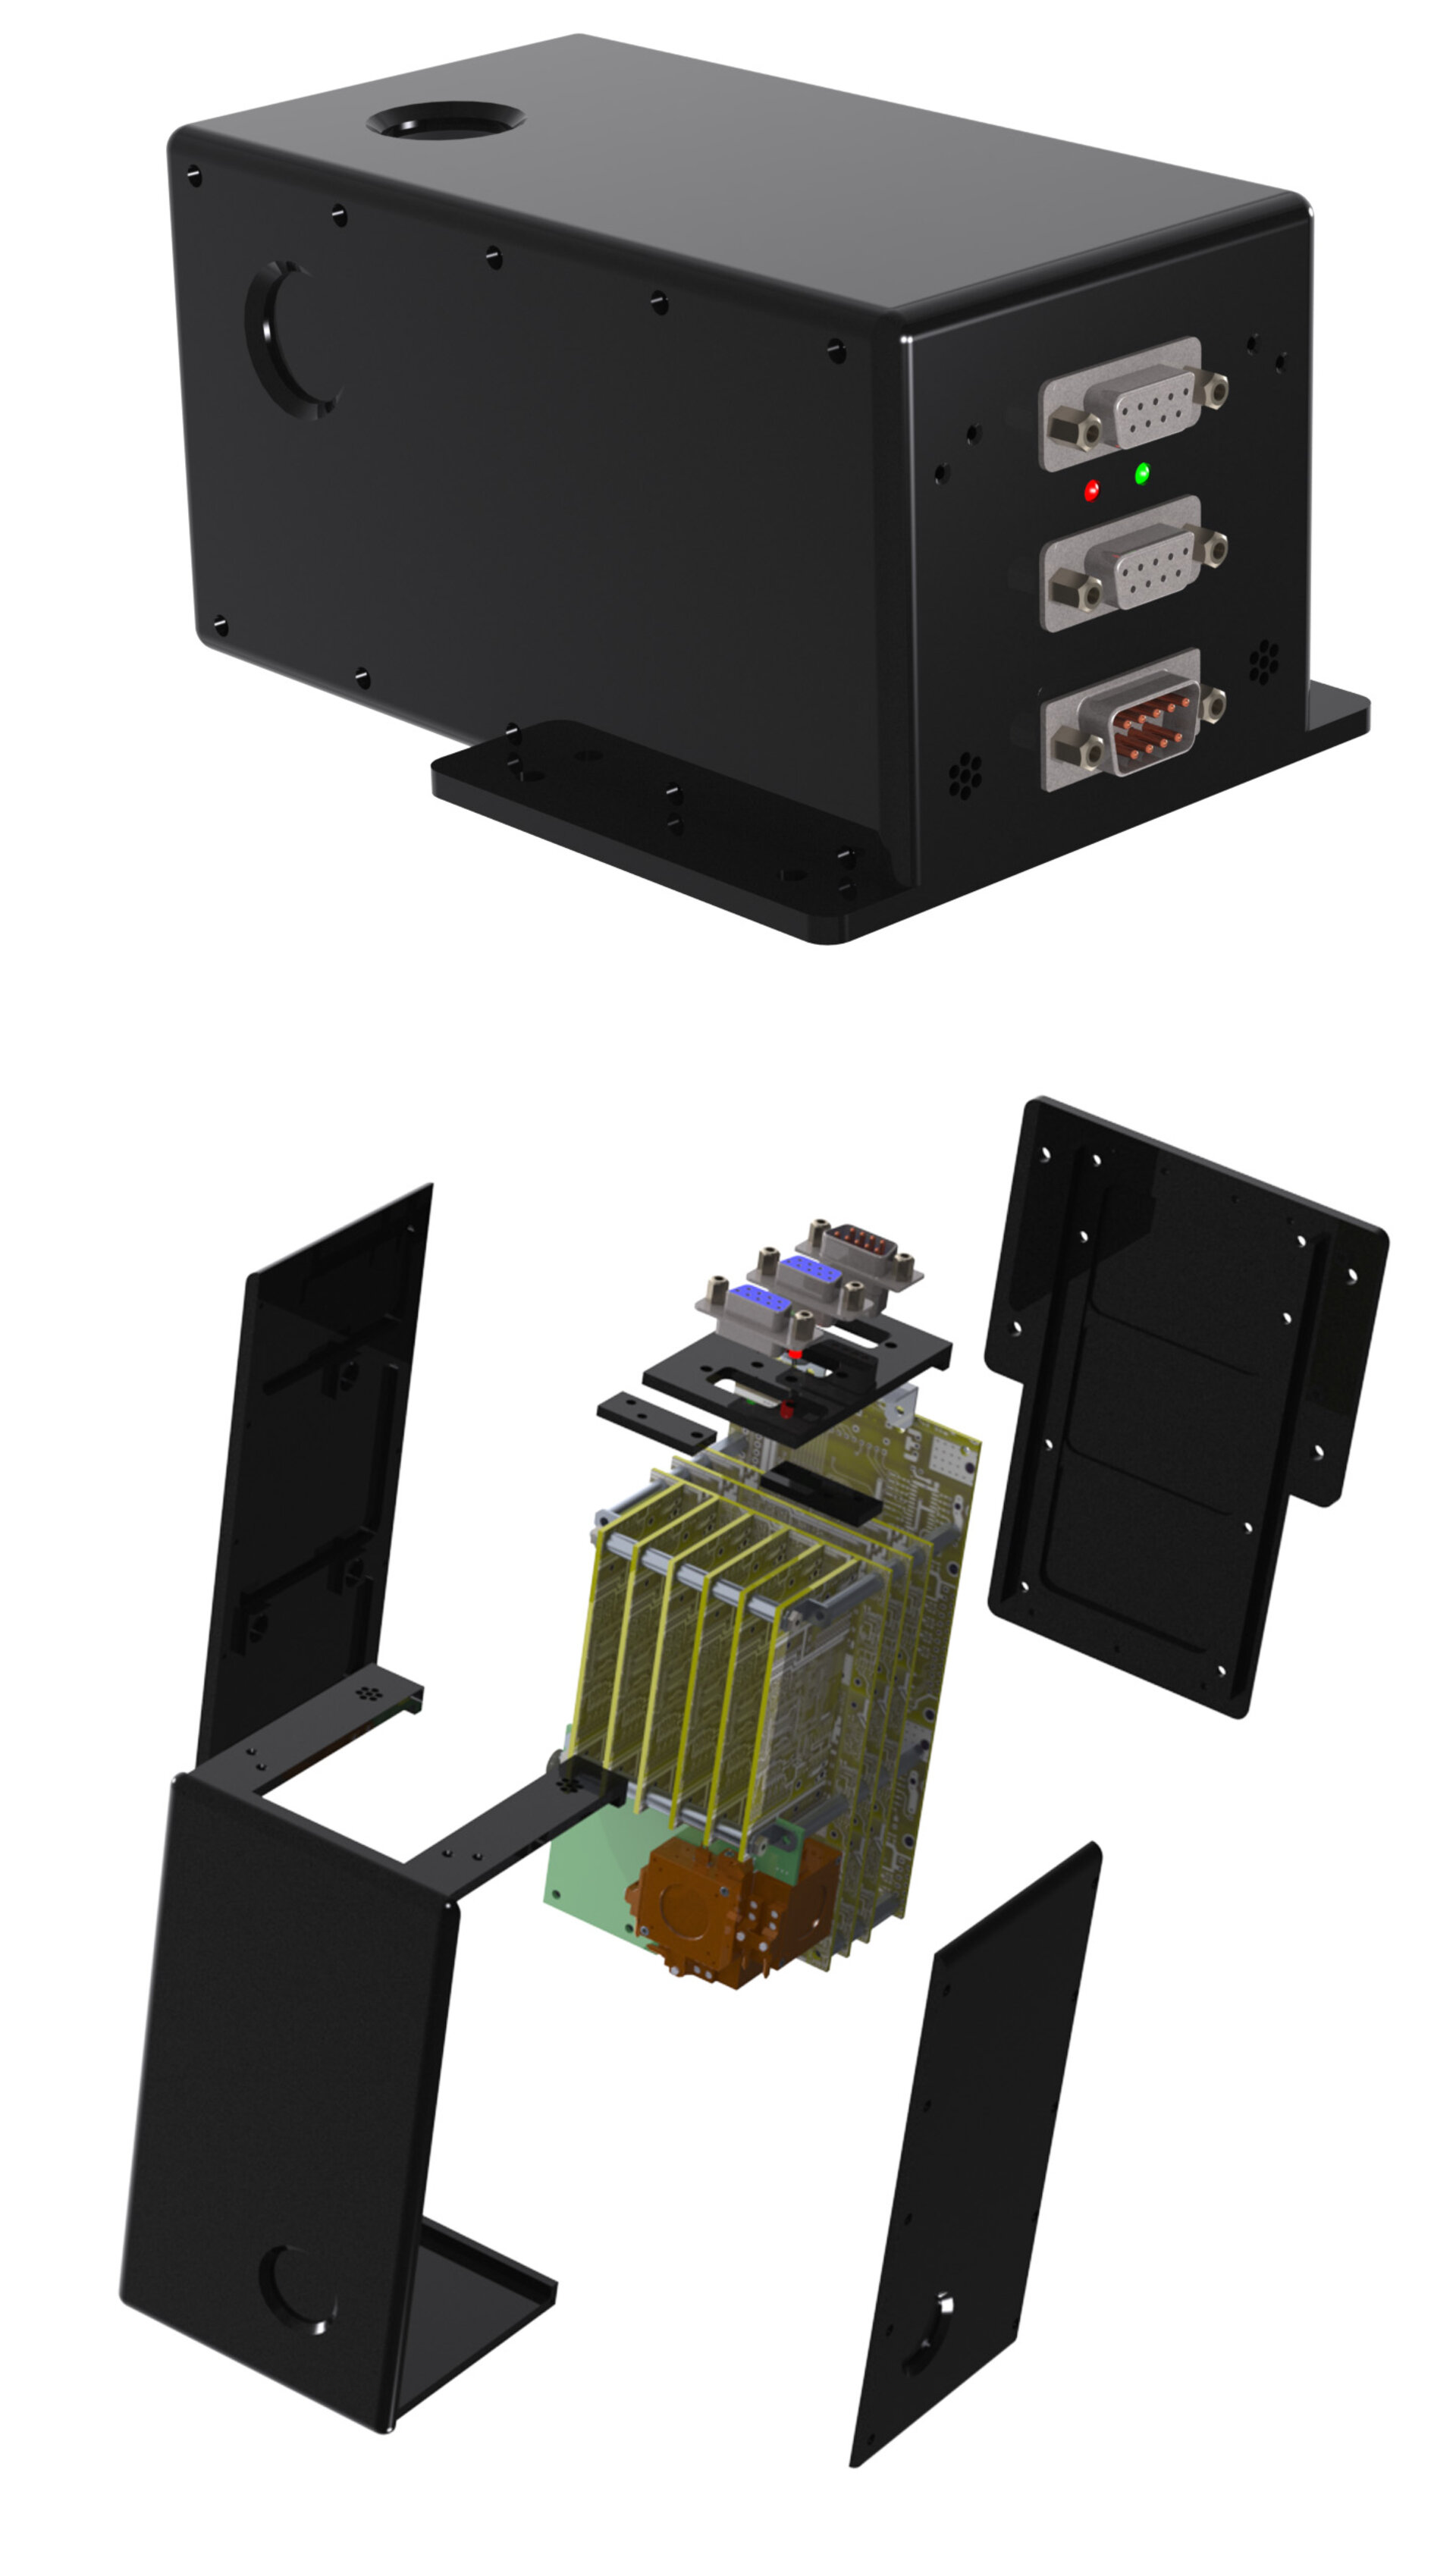 CAD - Model of TRITEL payload (top, bottom exploded view)